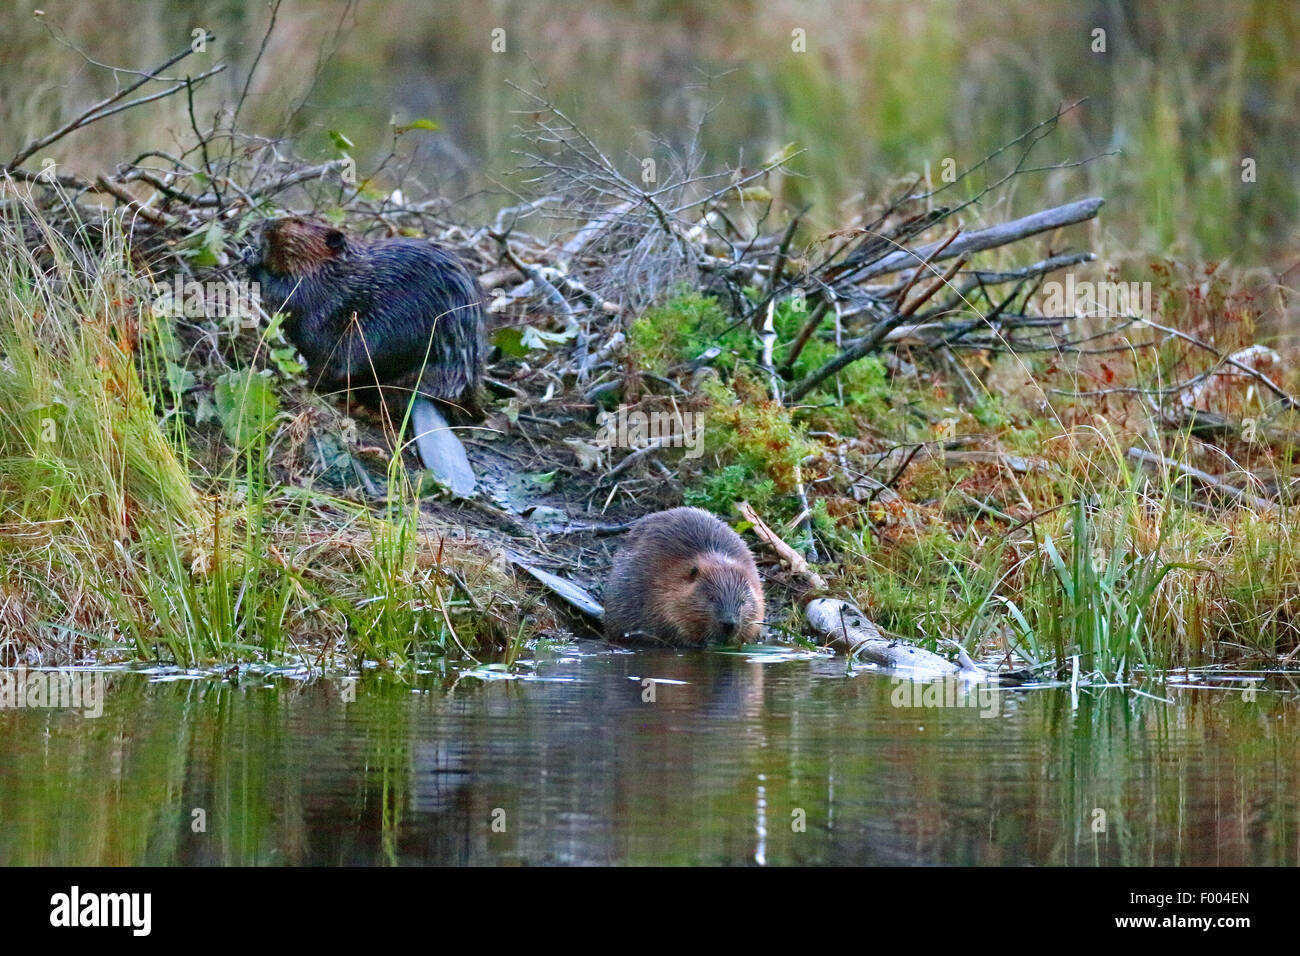 North American beaver, Canadian beaver (Castor canadensis), pair sits at the beaver lodge, Canada, Ontario, Algonquin Provincial Park Stock Photo